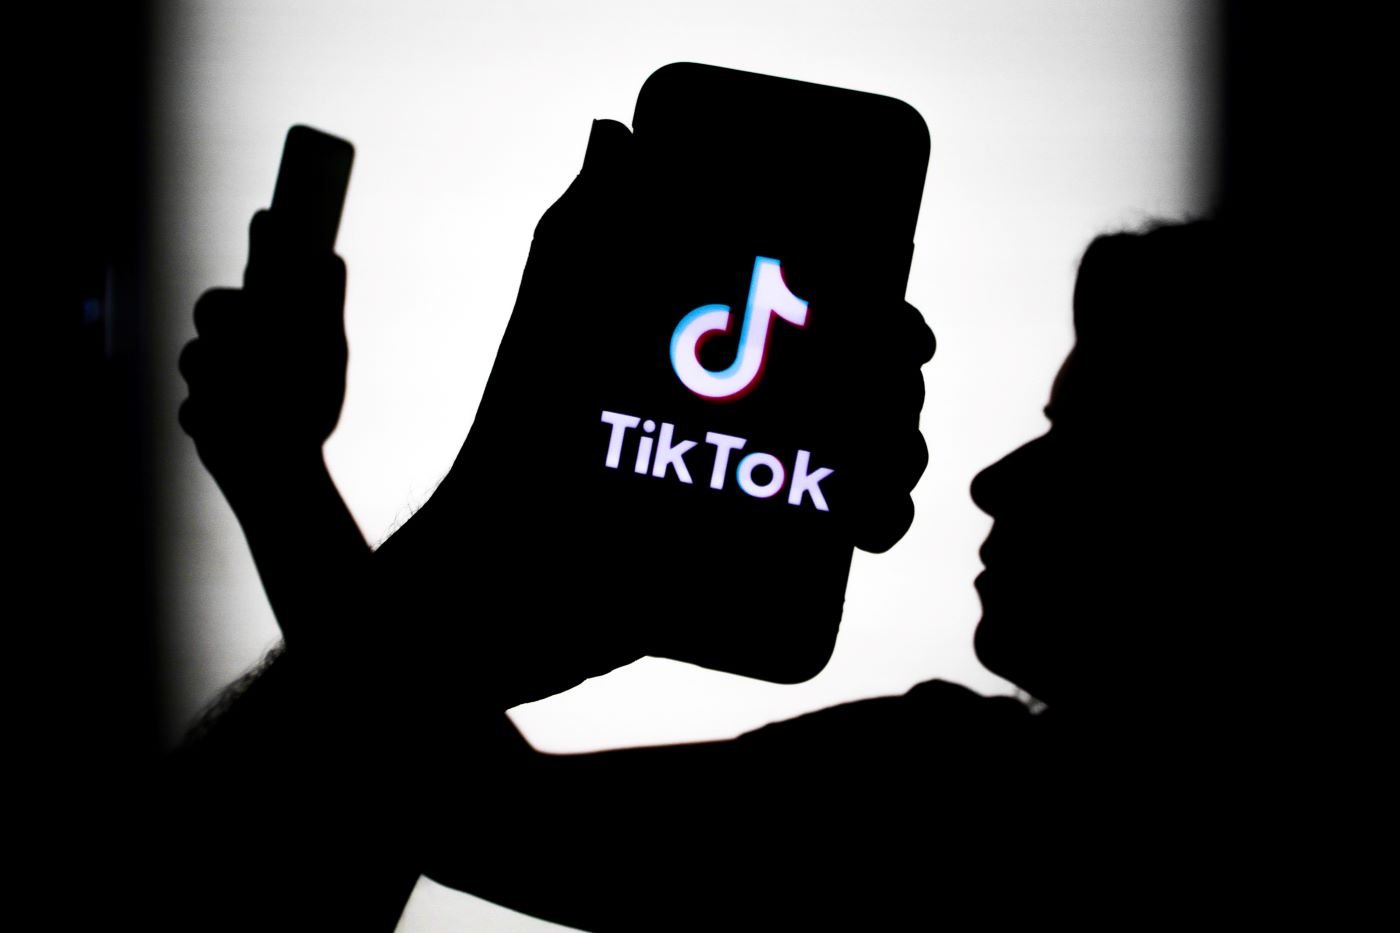 Shadows of a person holding a phone out in front of their face with their arm crossed with a closeup picture of a shadow of a hand holding a phone with the Tik Tok logo on it all against a white background.